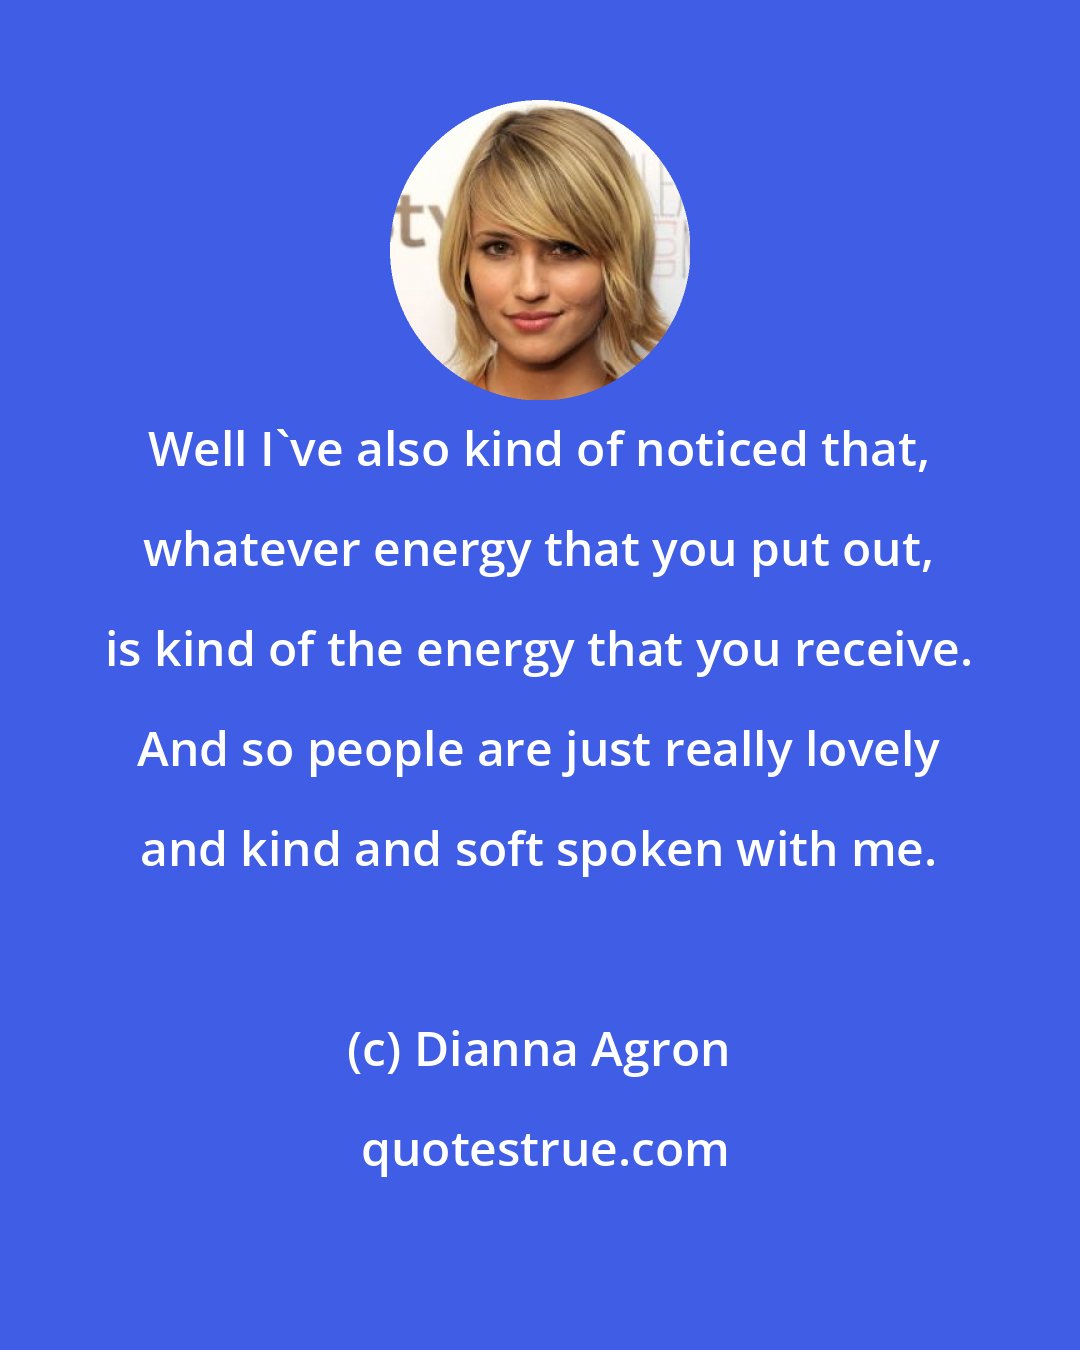 Dianna Agron: Well I've also kind of noticed that, whatever energy that you put out, is kind of the energy that you receive. And so people are just really lovely and kind and soft spoken with me.